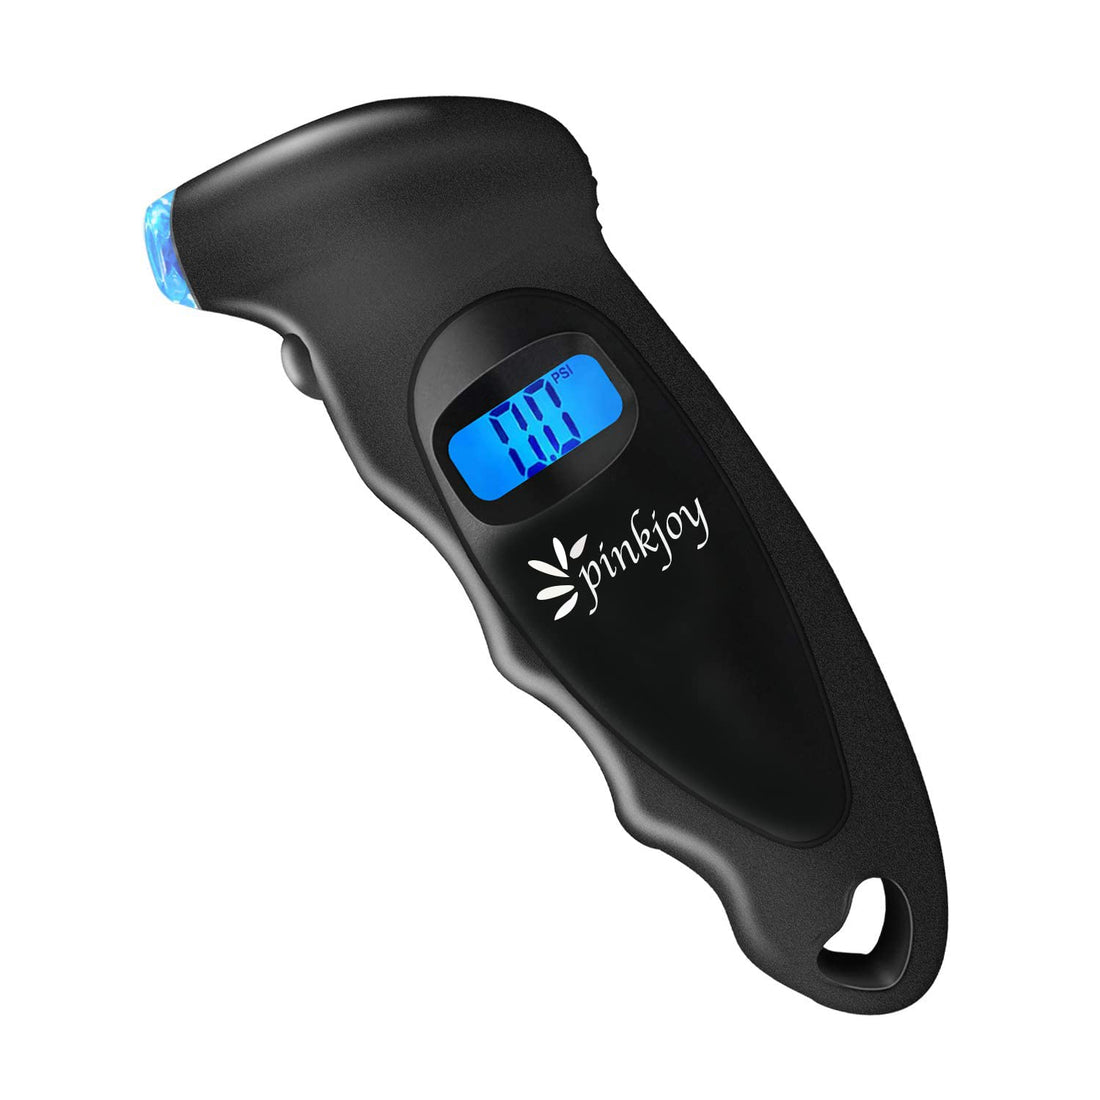 PINKJOY Digital Tire Pressure Gauge 150 PSI, 4 Settings, Tire Gauge for Car, Truck, Motorcycle, Bicycle with Backlit LCD and Non-Slip Grip (Black)